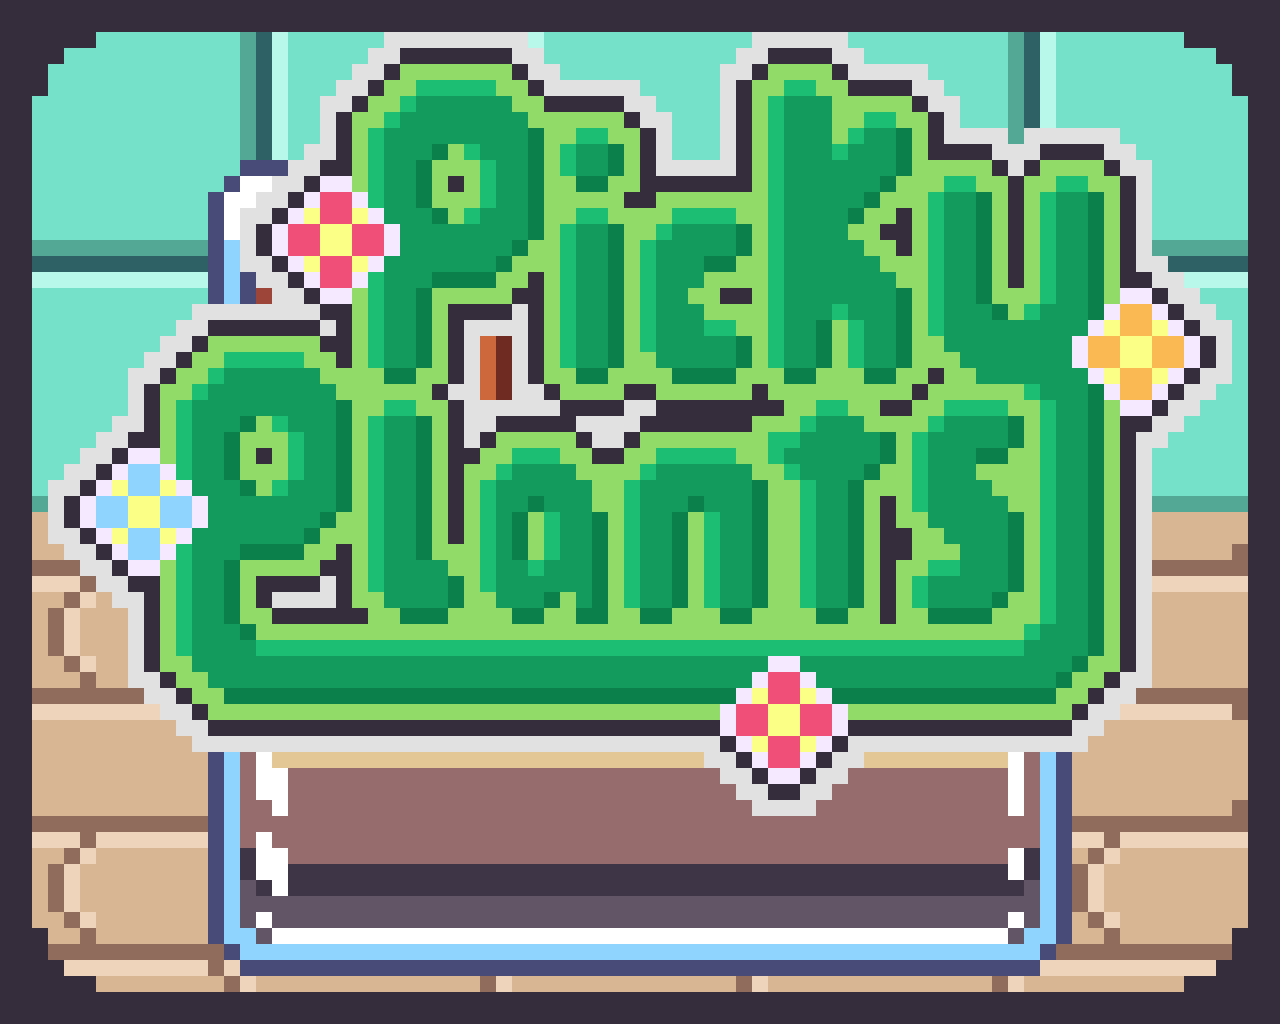 Picky Plants cover image